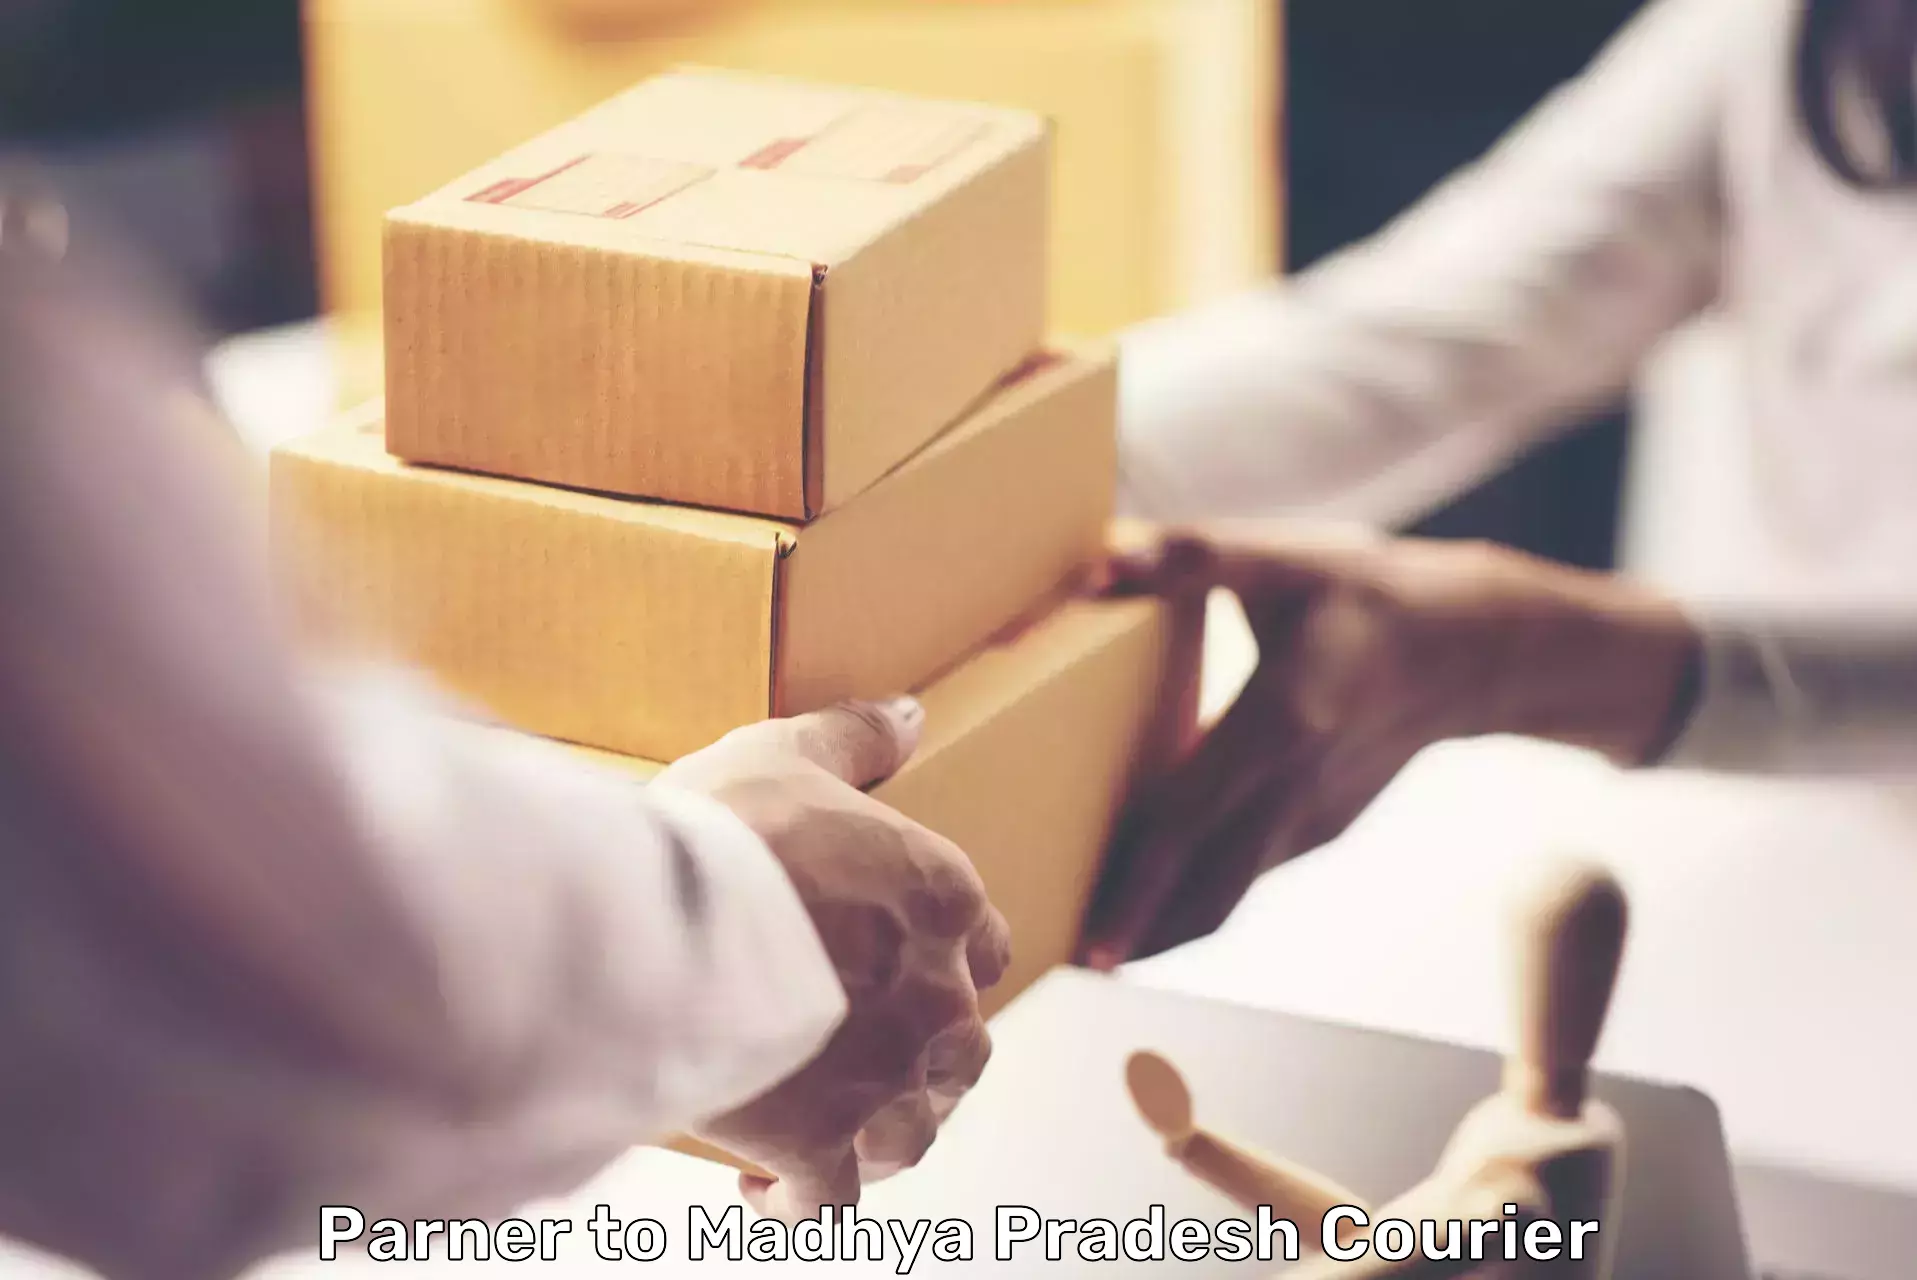 Cost-effective courier options Parner to Semariya